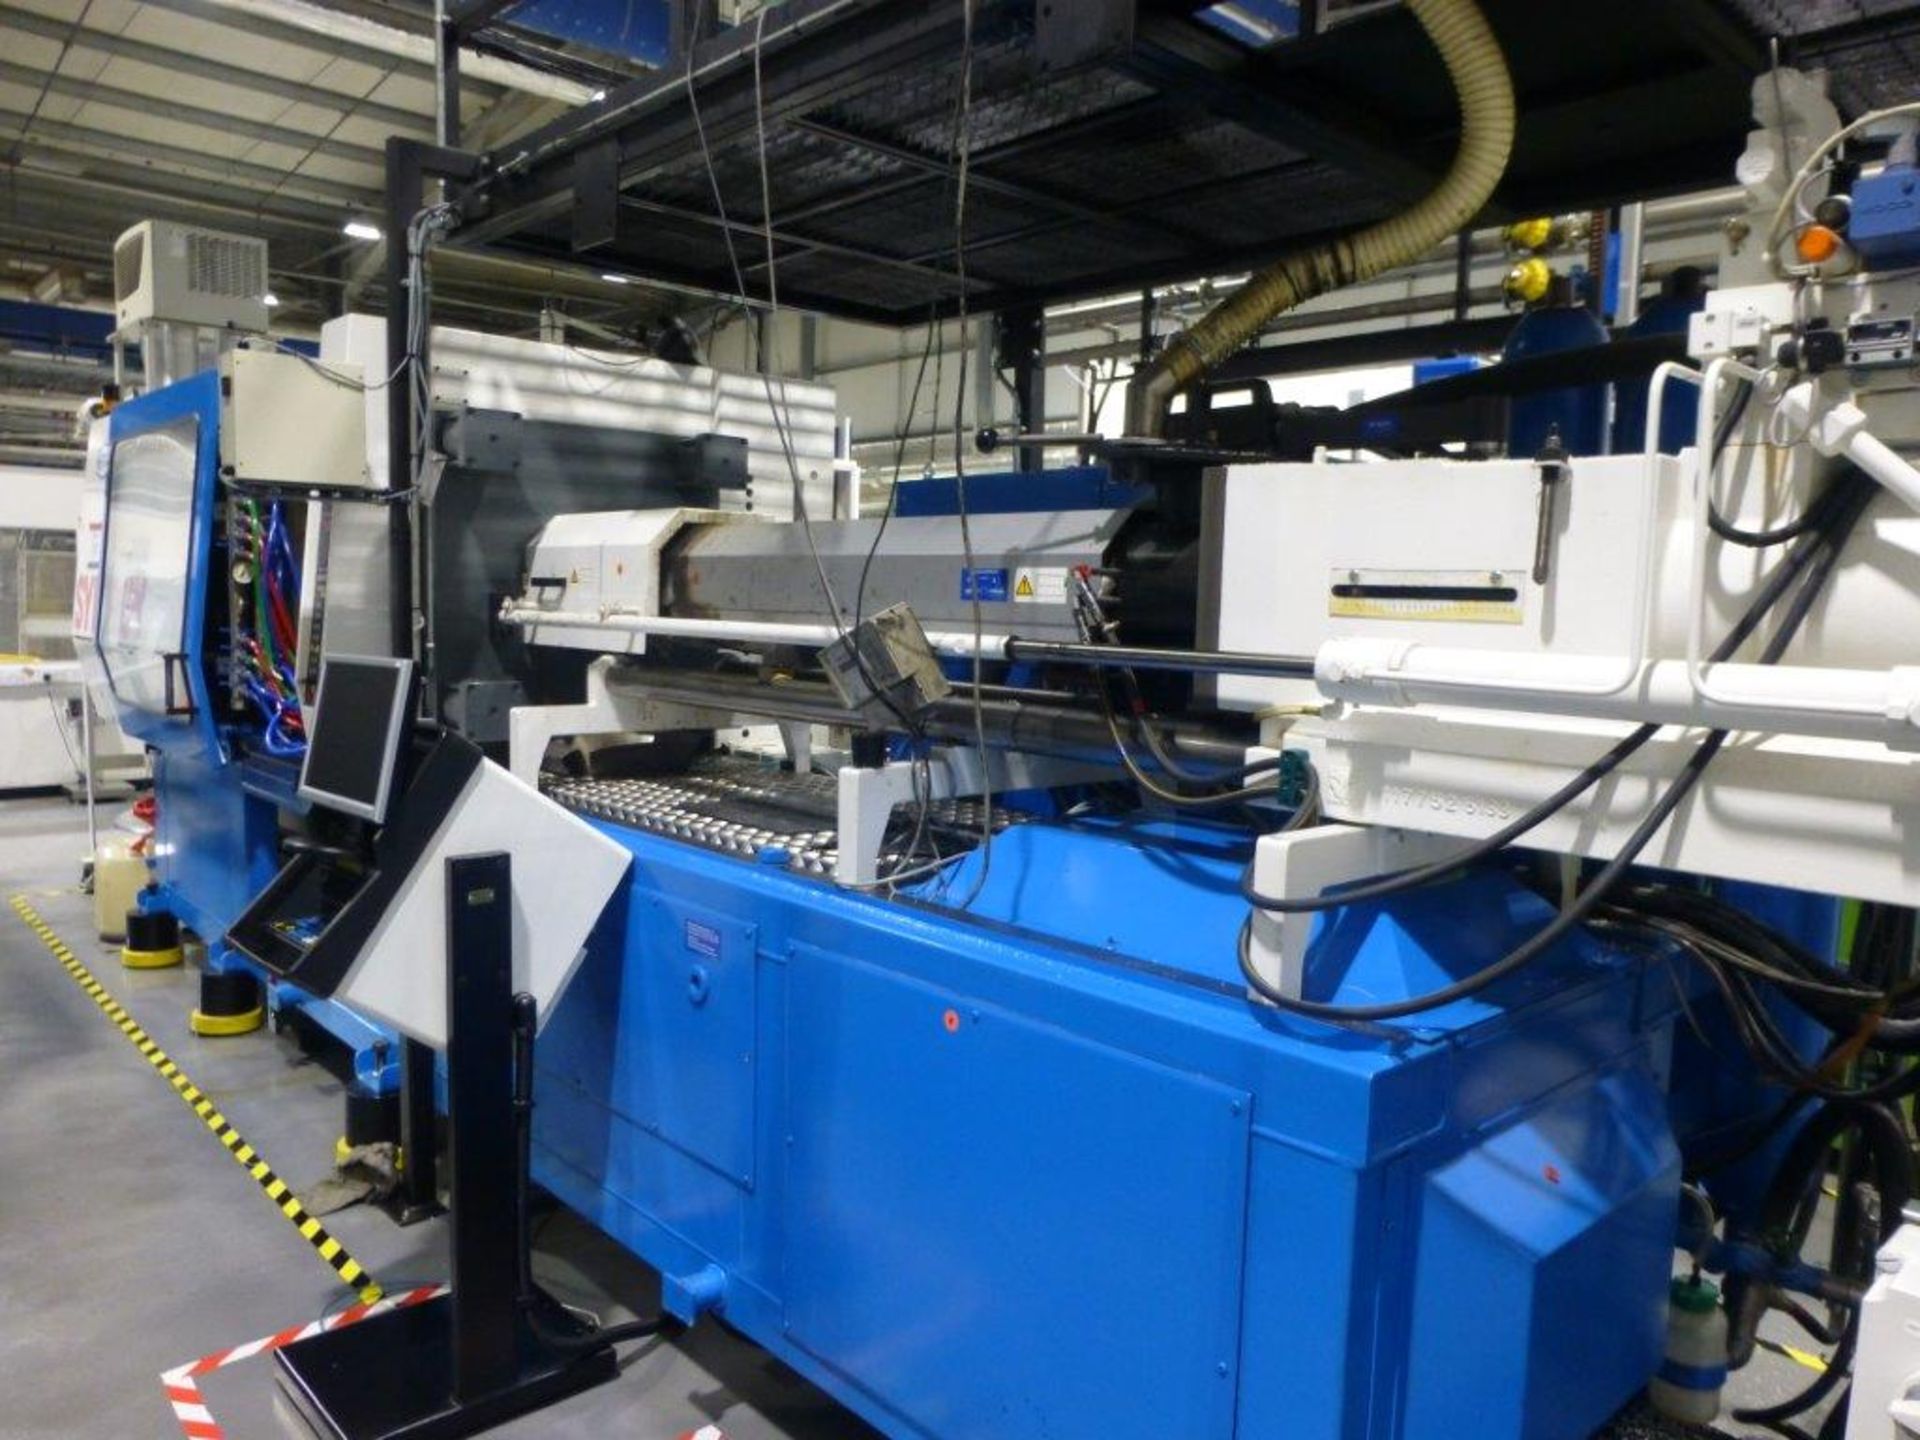 Netstal Synergy S-2400-2150 CNC Plastic Injection Moulding Machine Serial No. 9N.2004053601 (2004) - Image 2 of 7